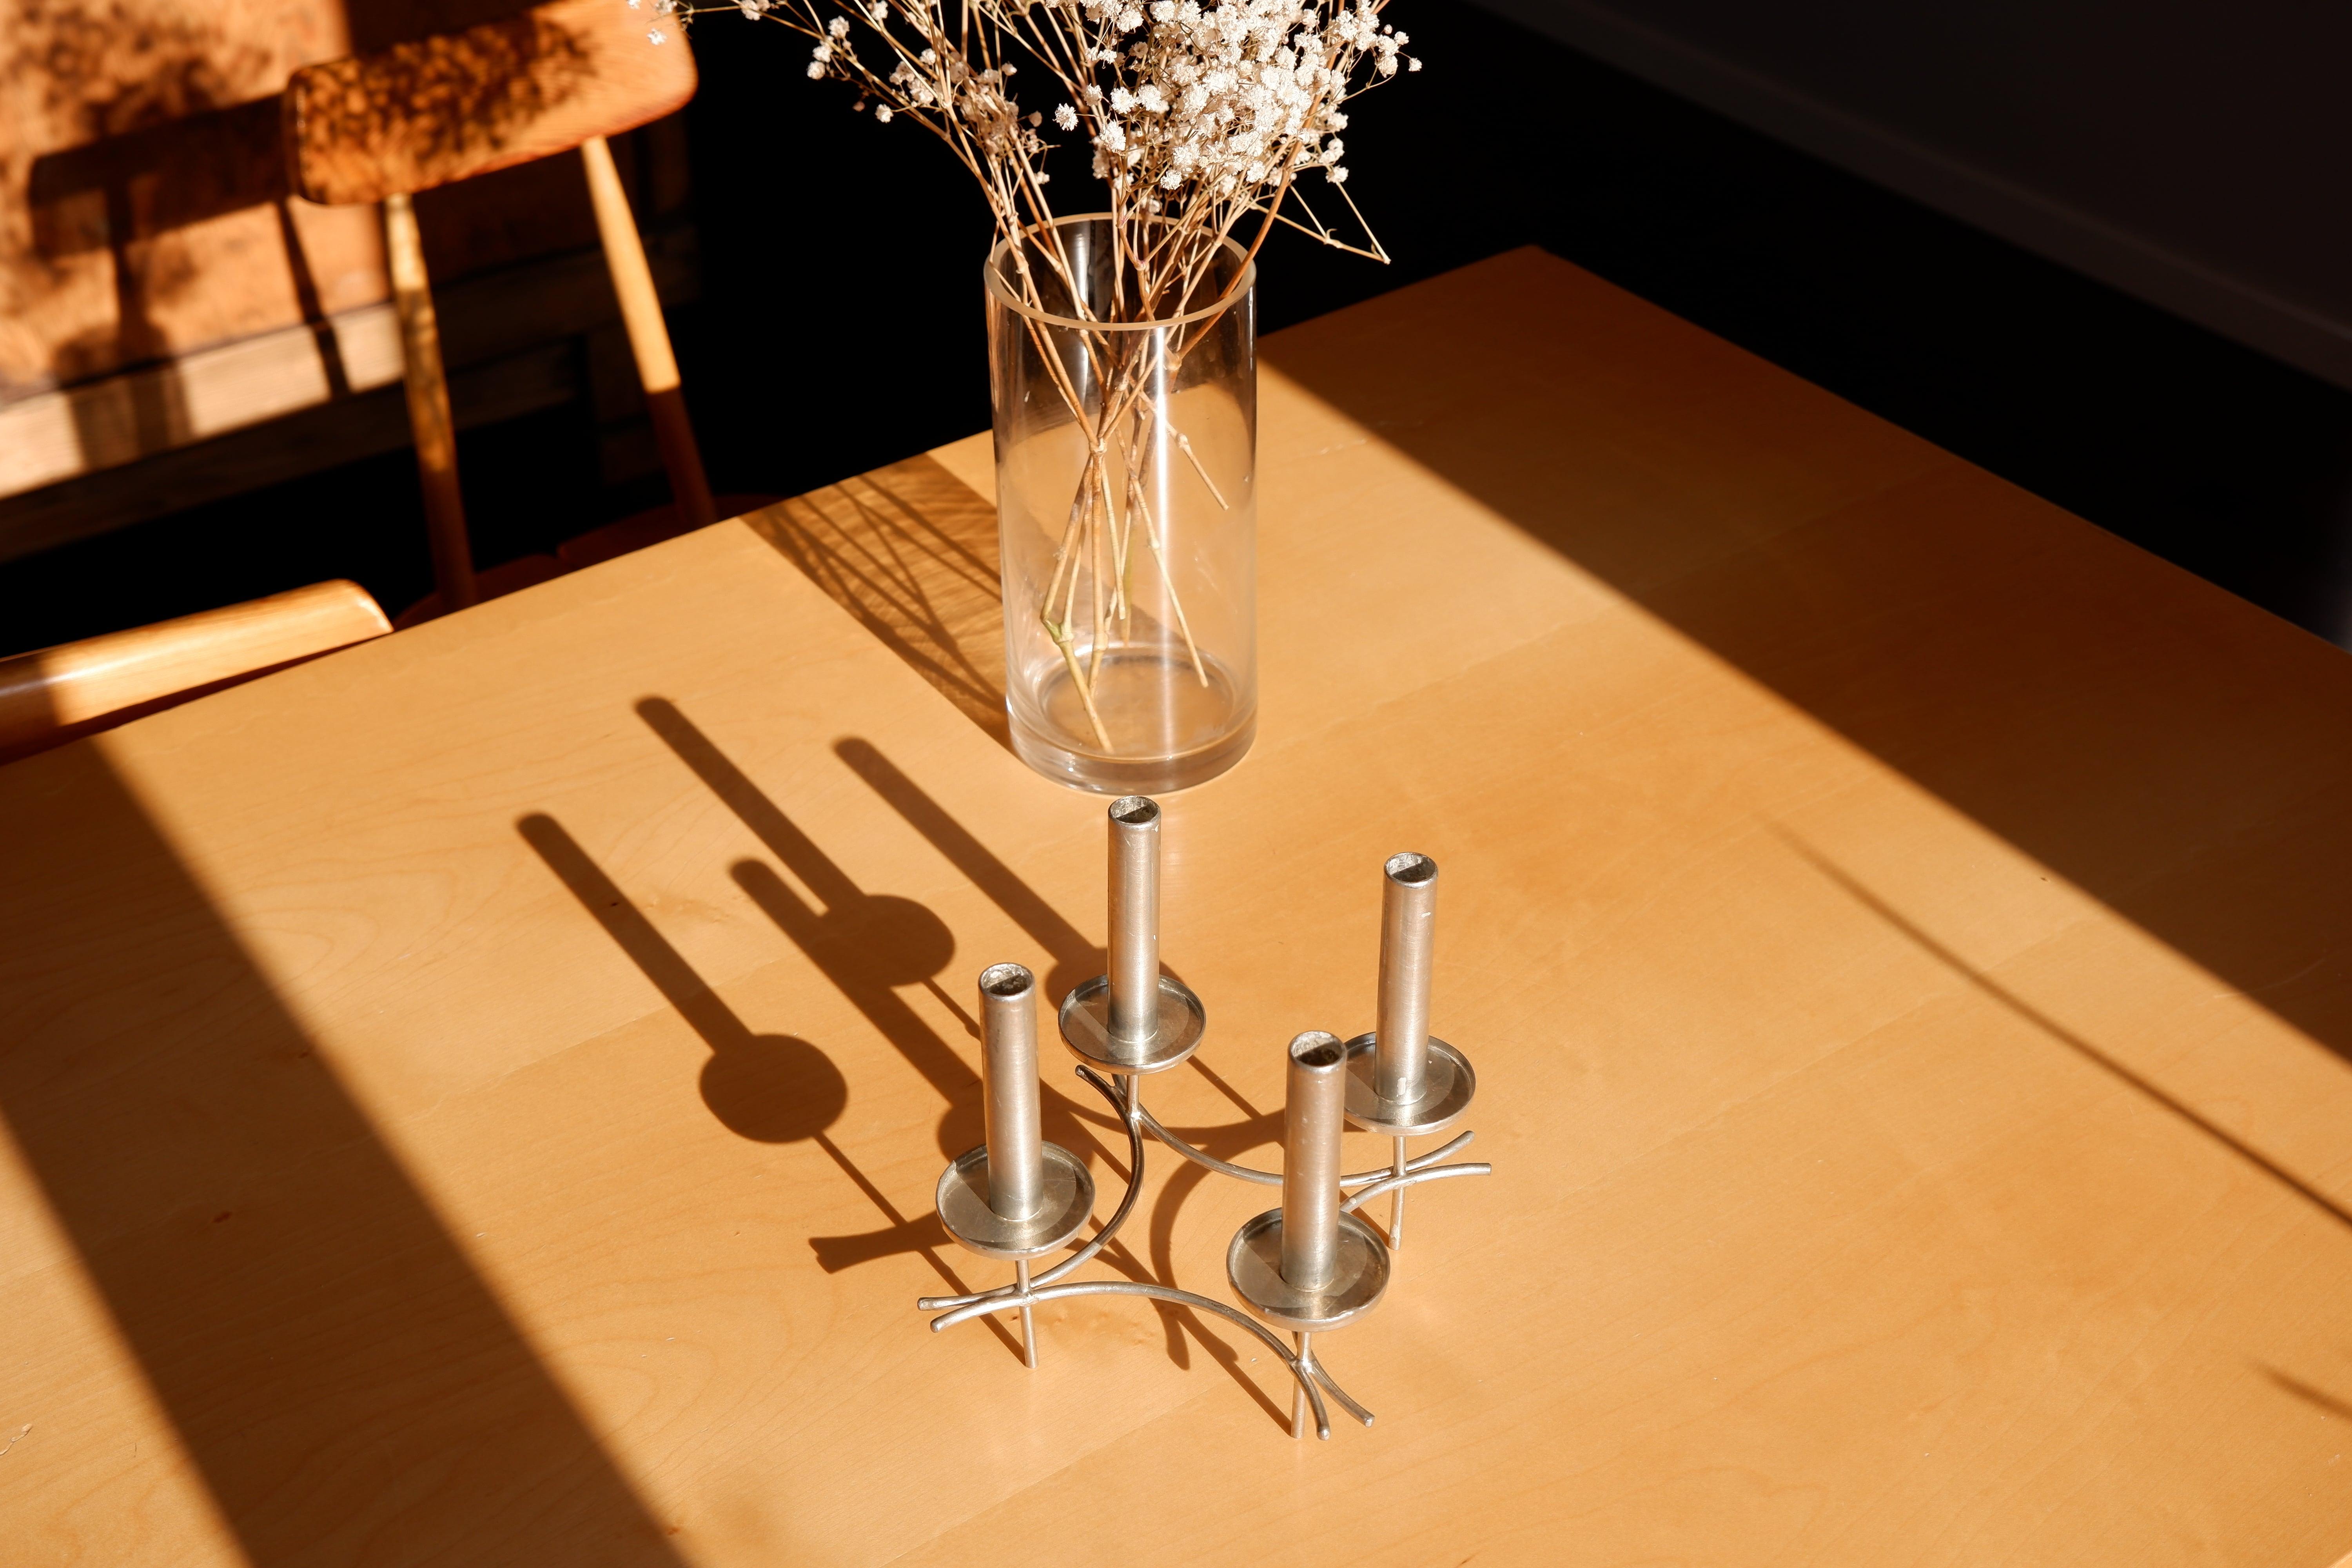 At the end of his carrier Paavo Tynell himself hand crafted a serie of candelabra that he made in nickel brass. From this collection this example has been hand crafted by Paavo Tynell in the late 60's. The piece is made in Nickel brass and can hold